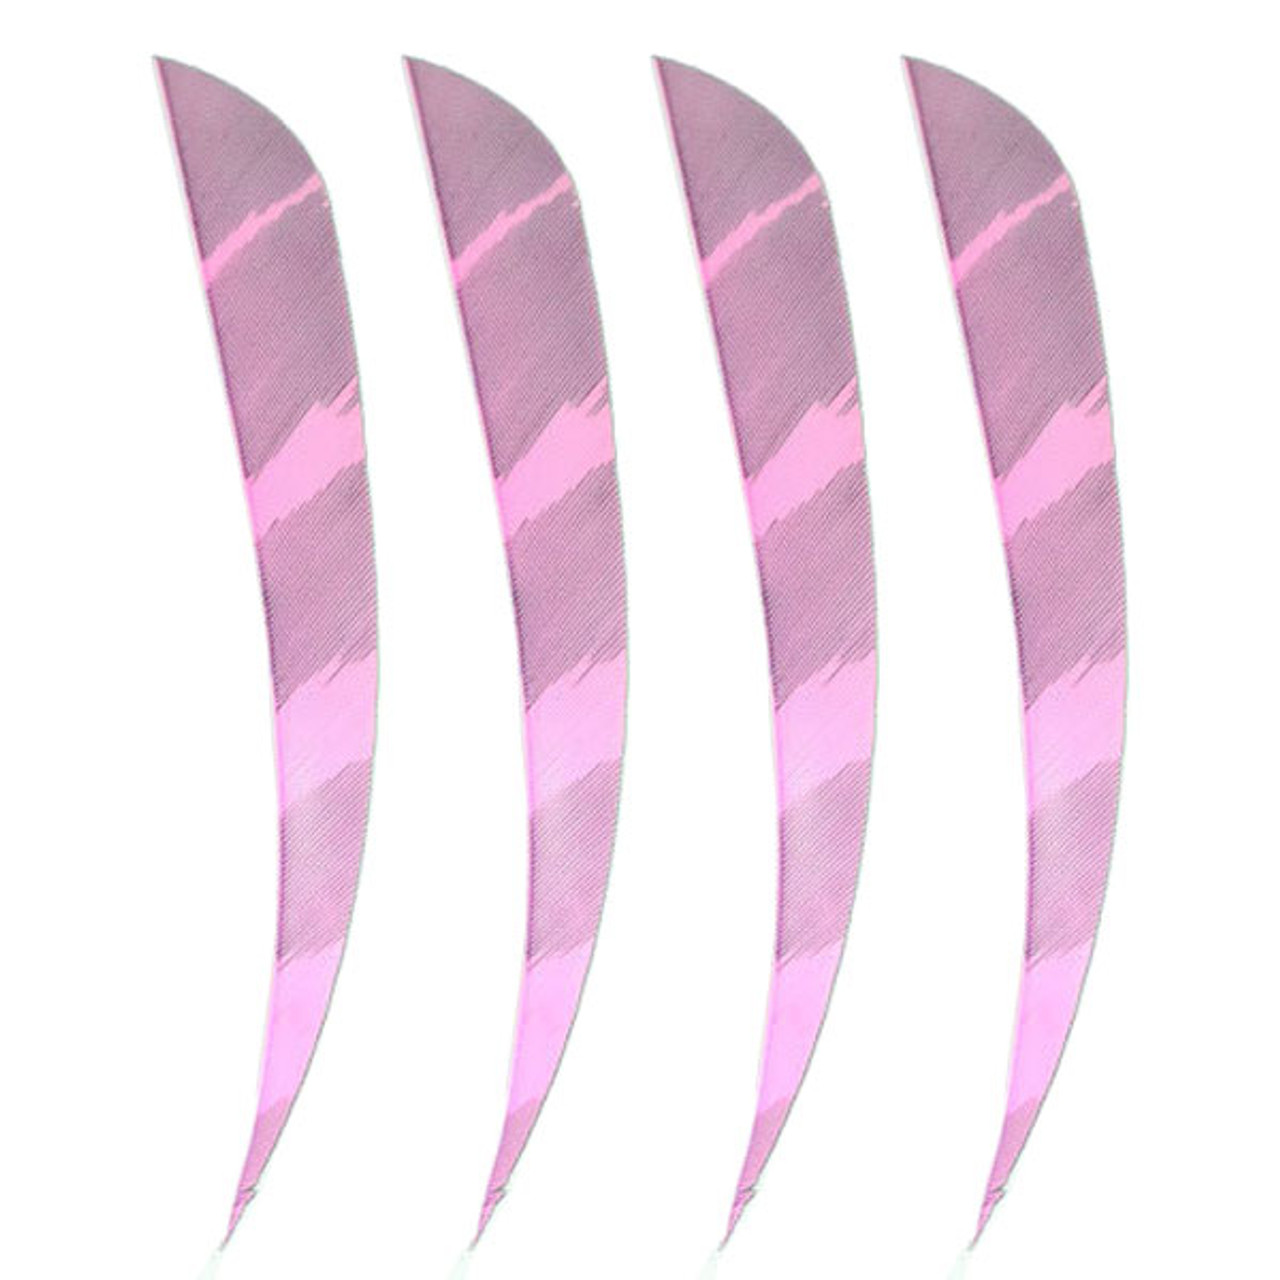 Muddy Buck Gear 4" Parabolic RW Barred Feathers - 50 Pack (Flo Pink)